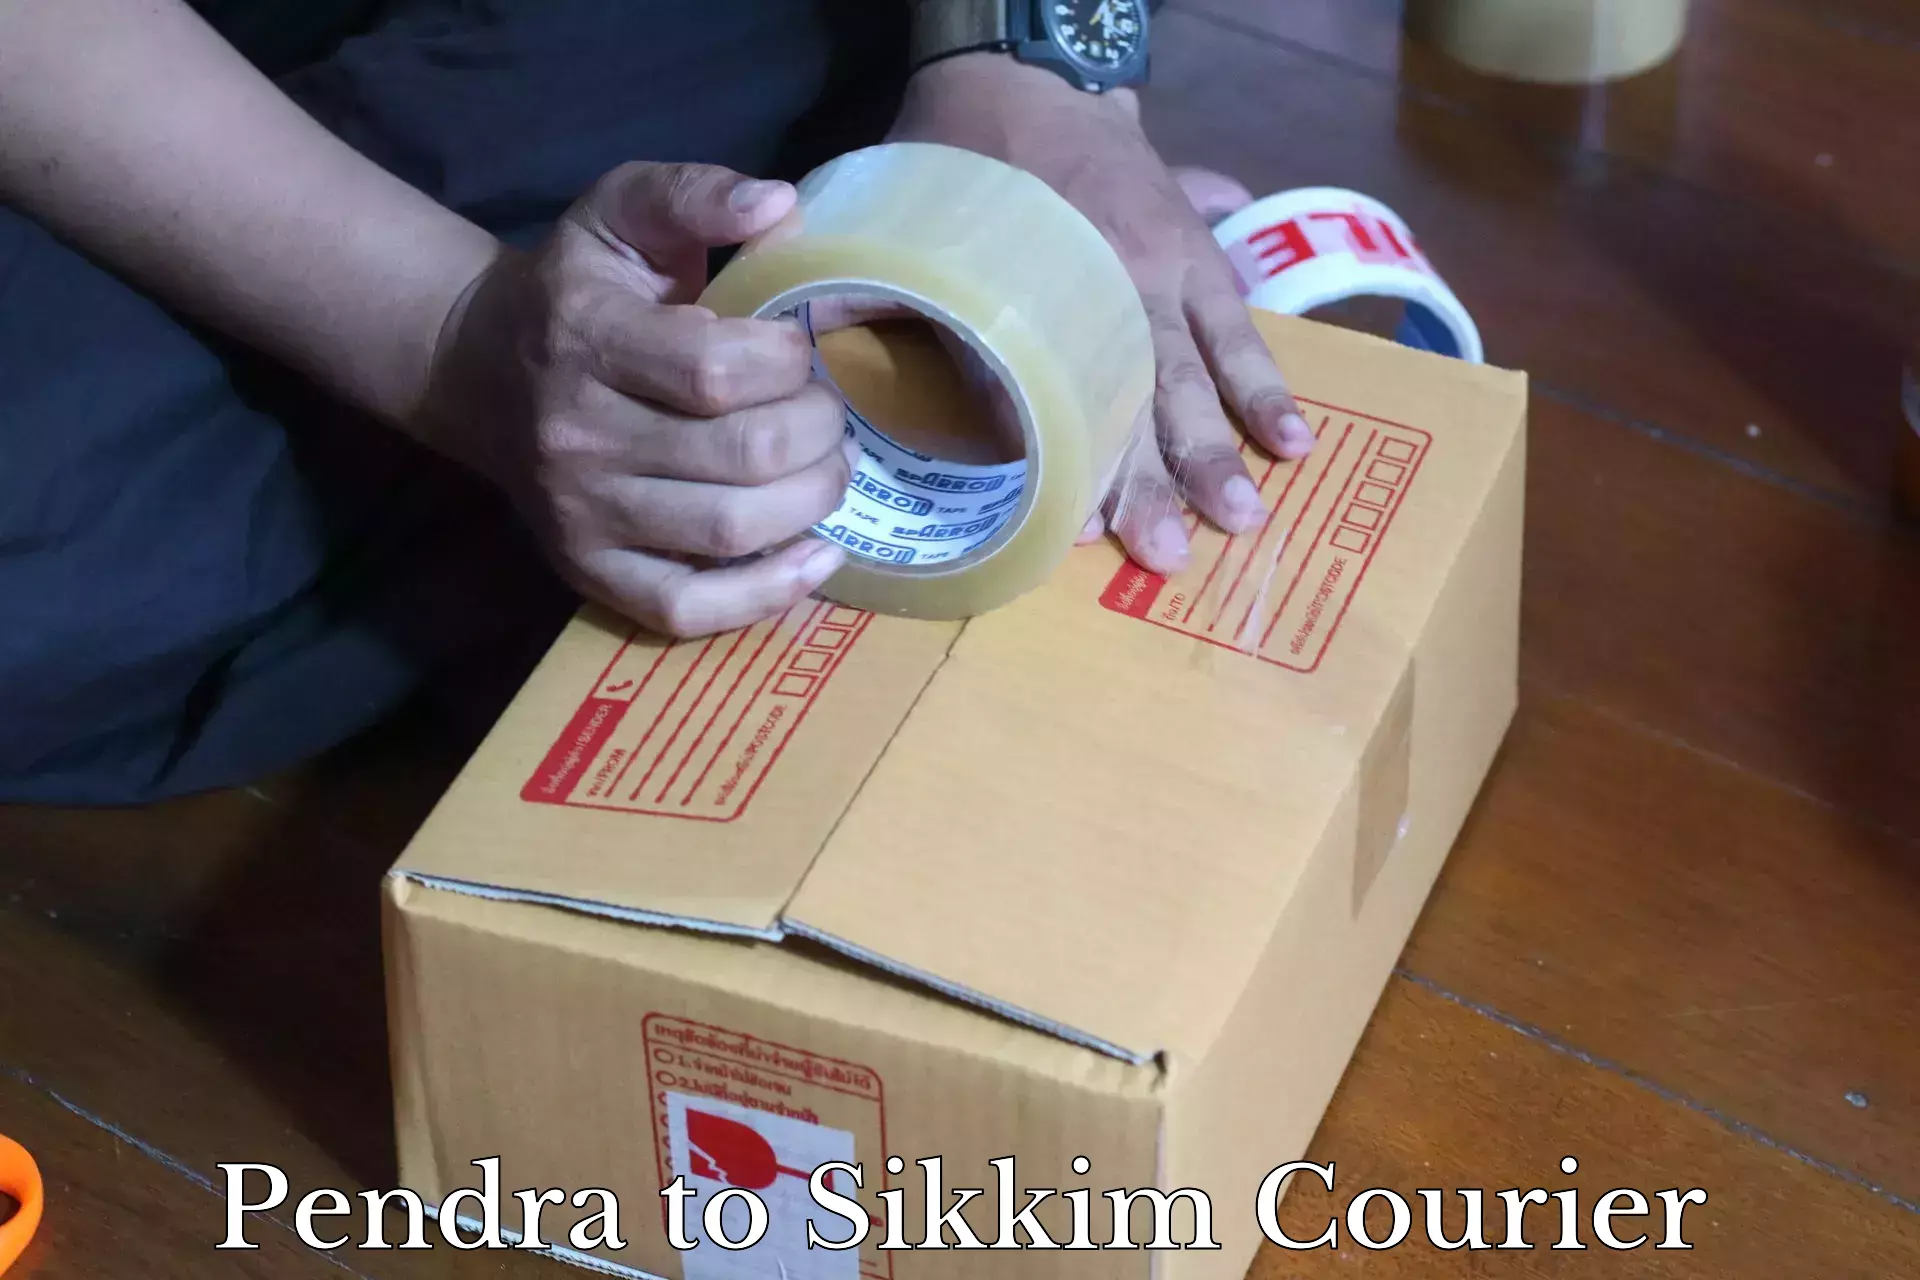 High-priority parcel service Pendra to South Sikkim